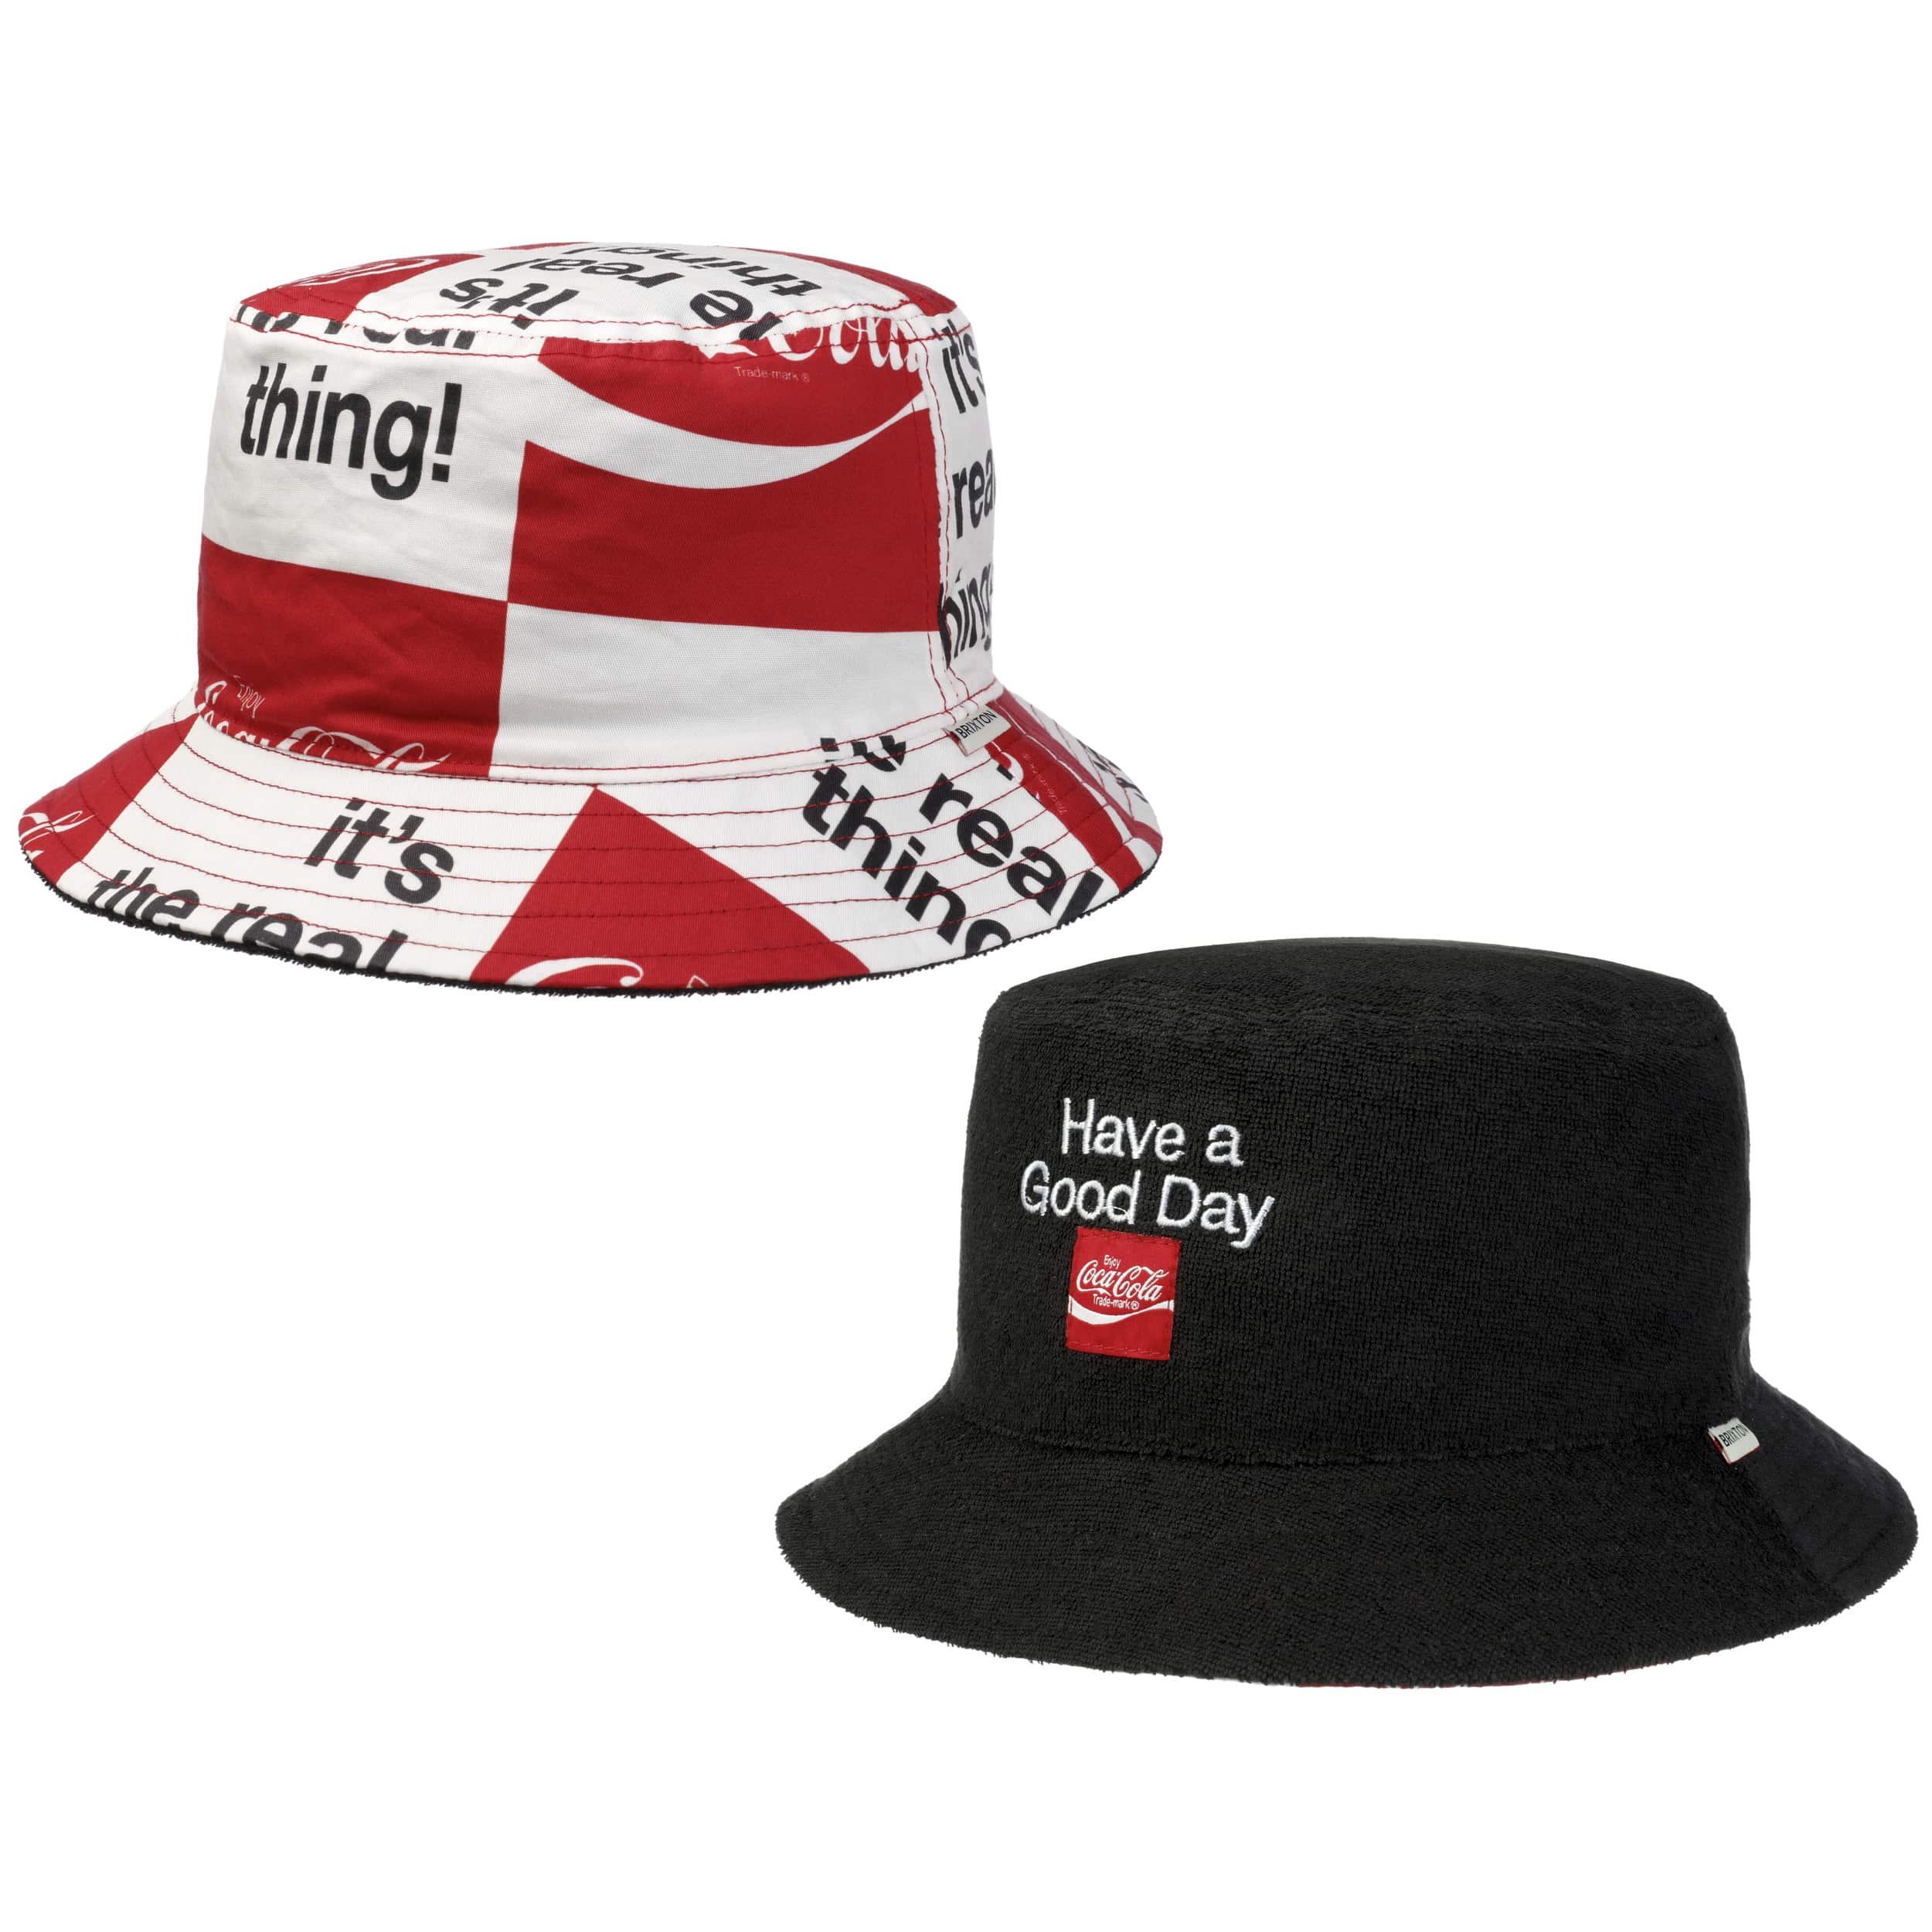 Coca-Cola Good Day Reversible Hat by Brixton - 62,95 €